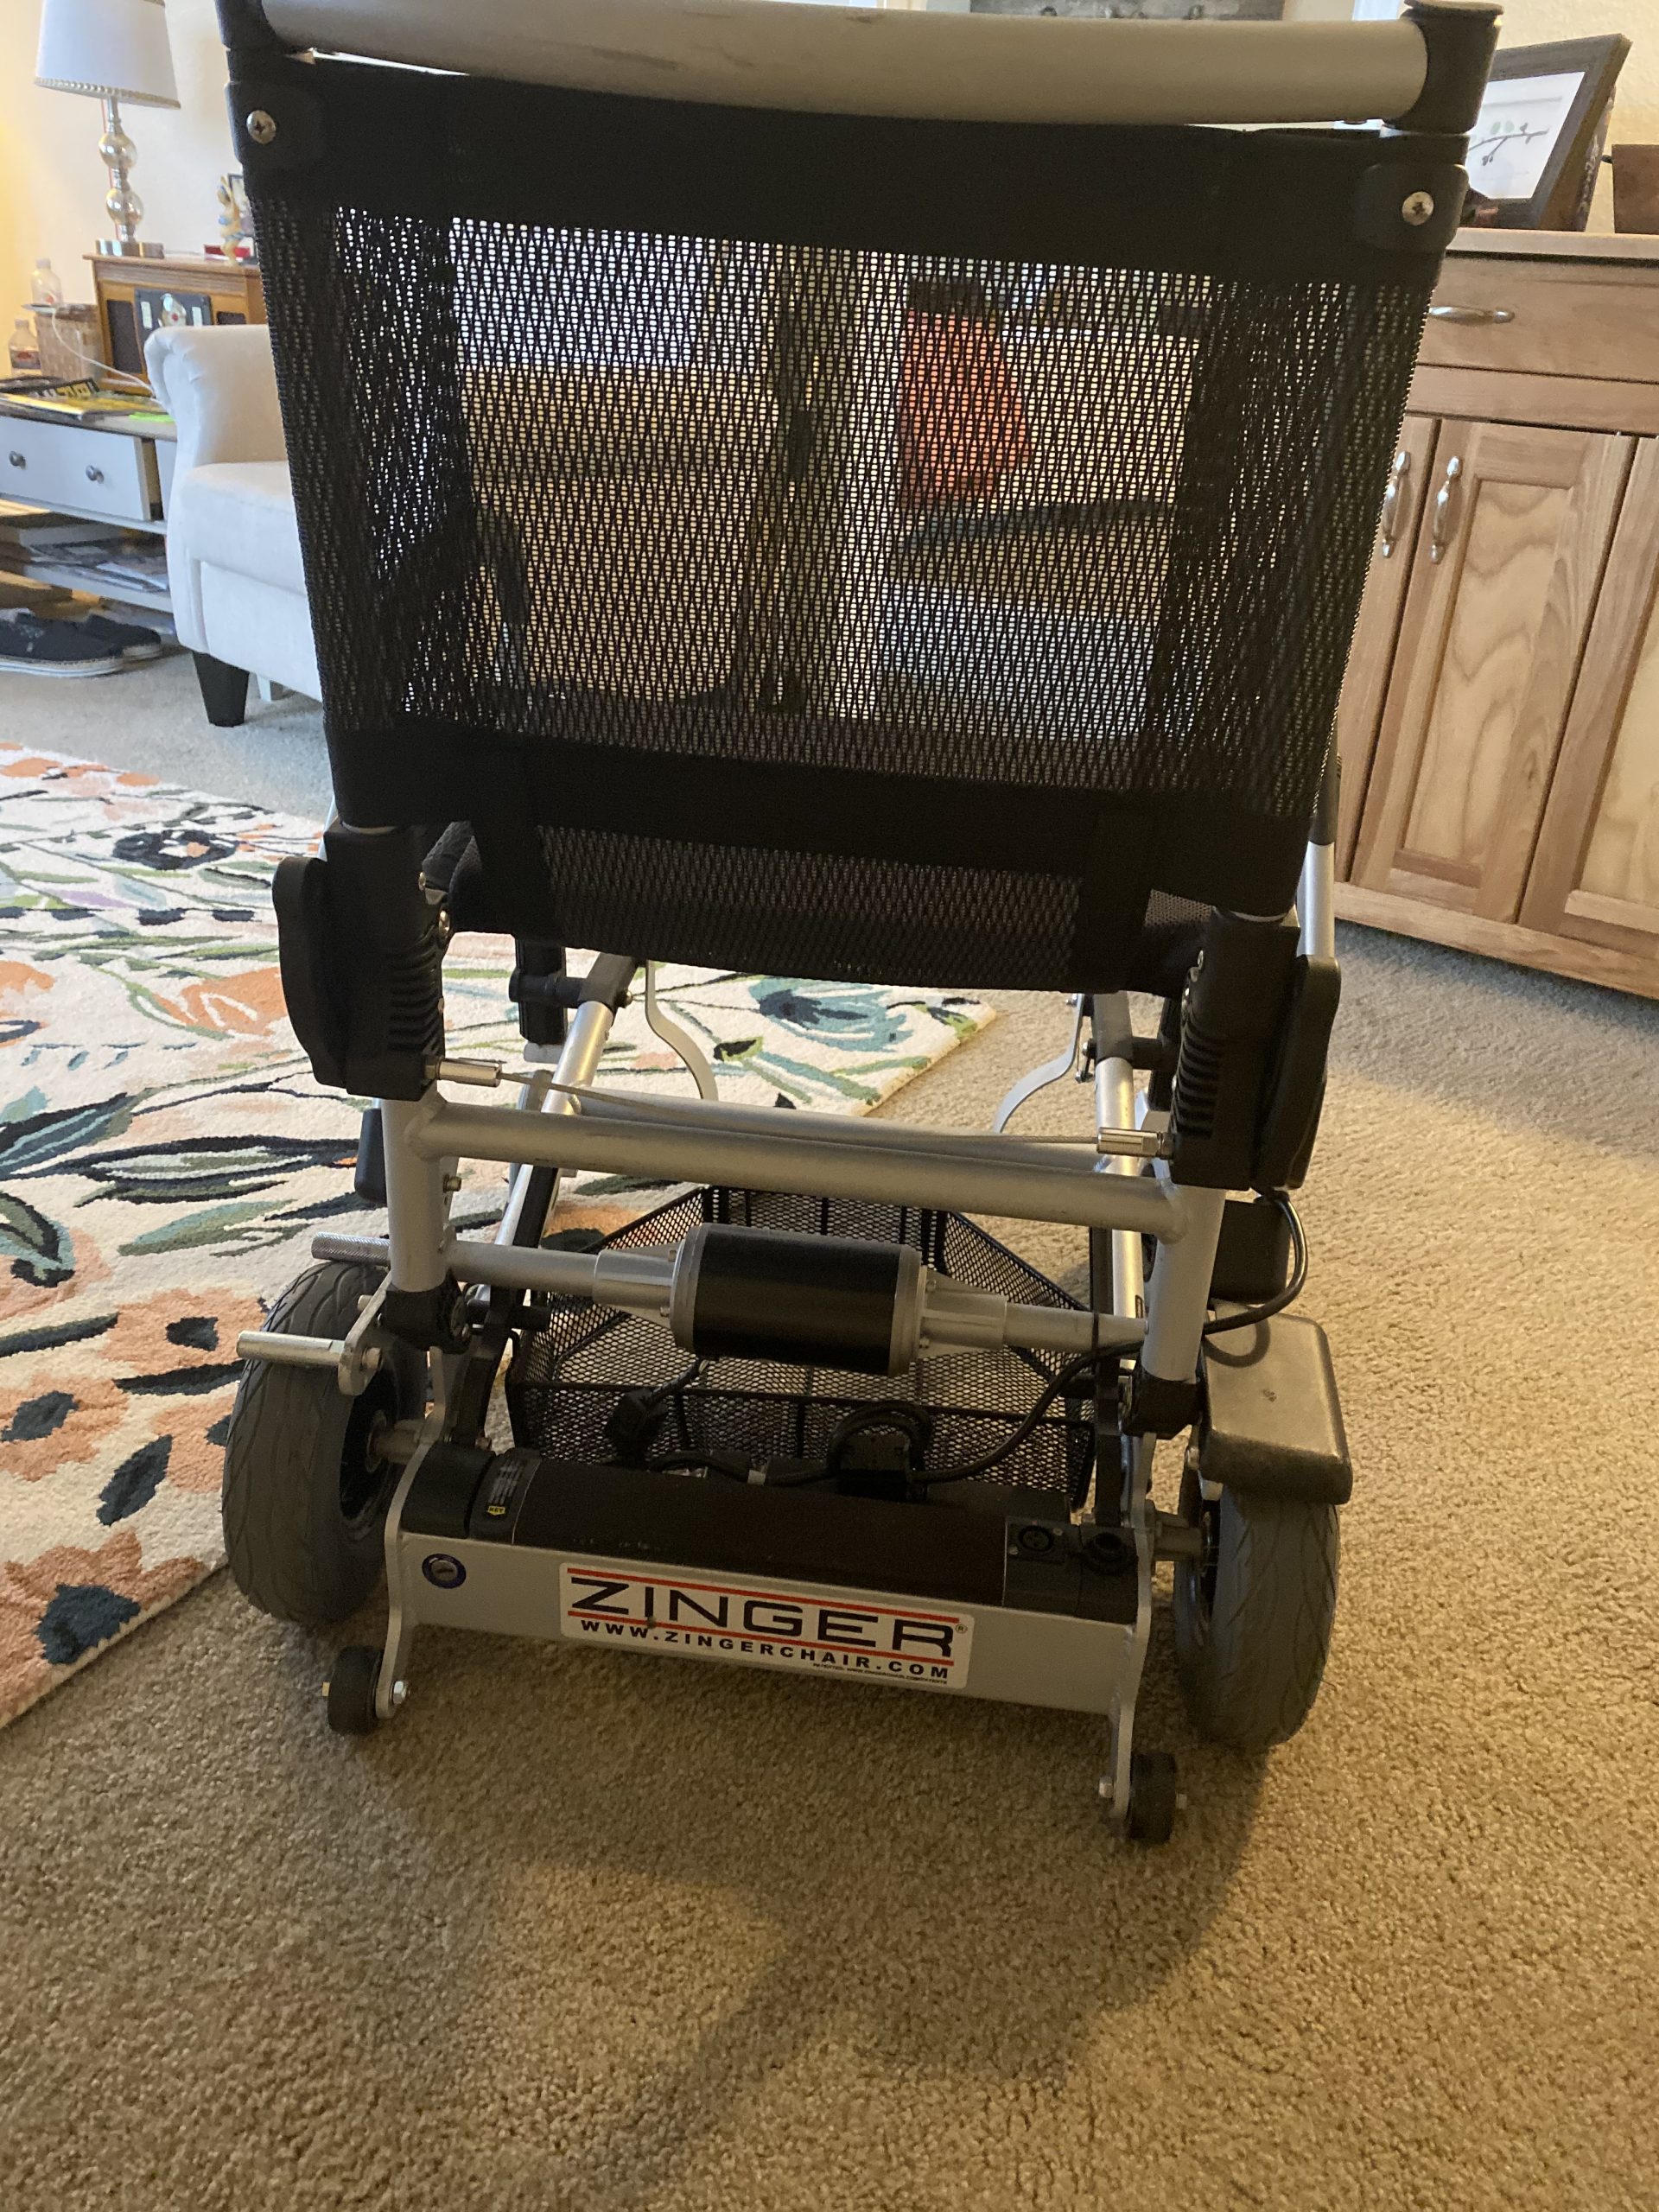 Zinger power chair Buy & Sell Used Electric Wheelchairs